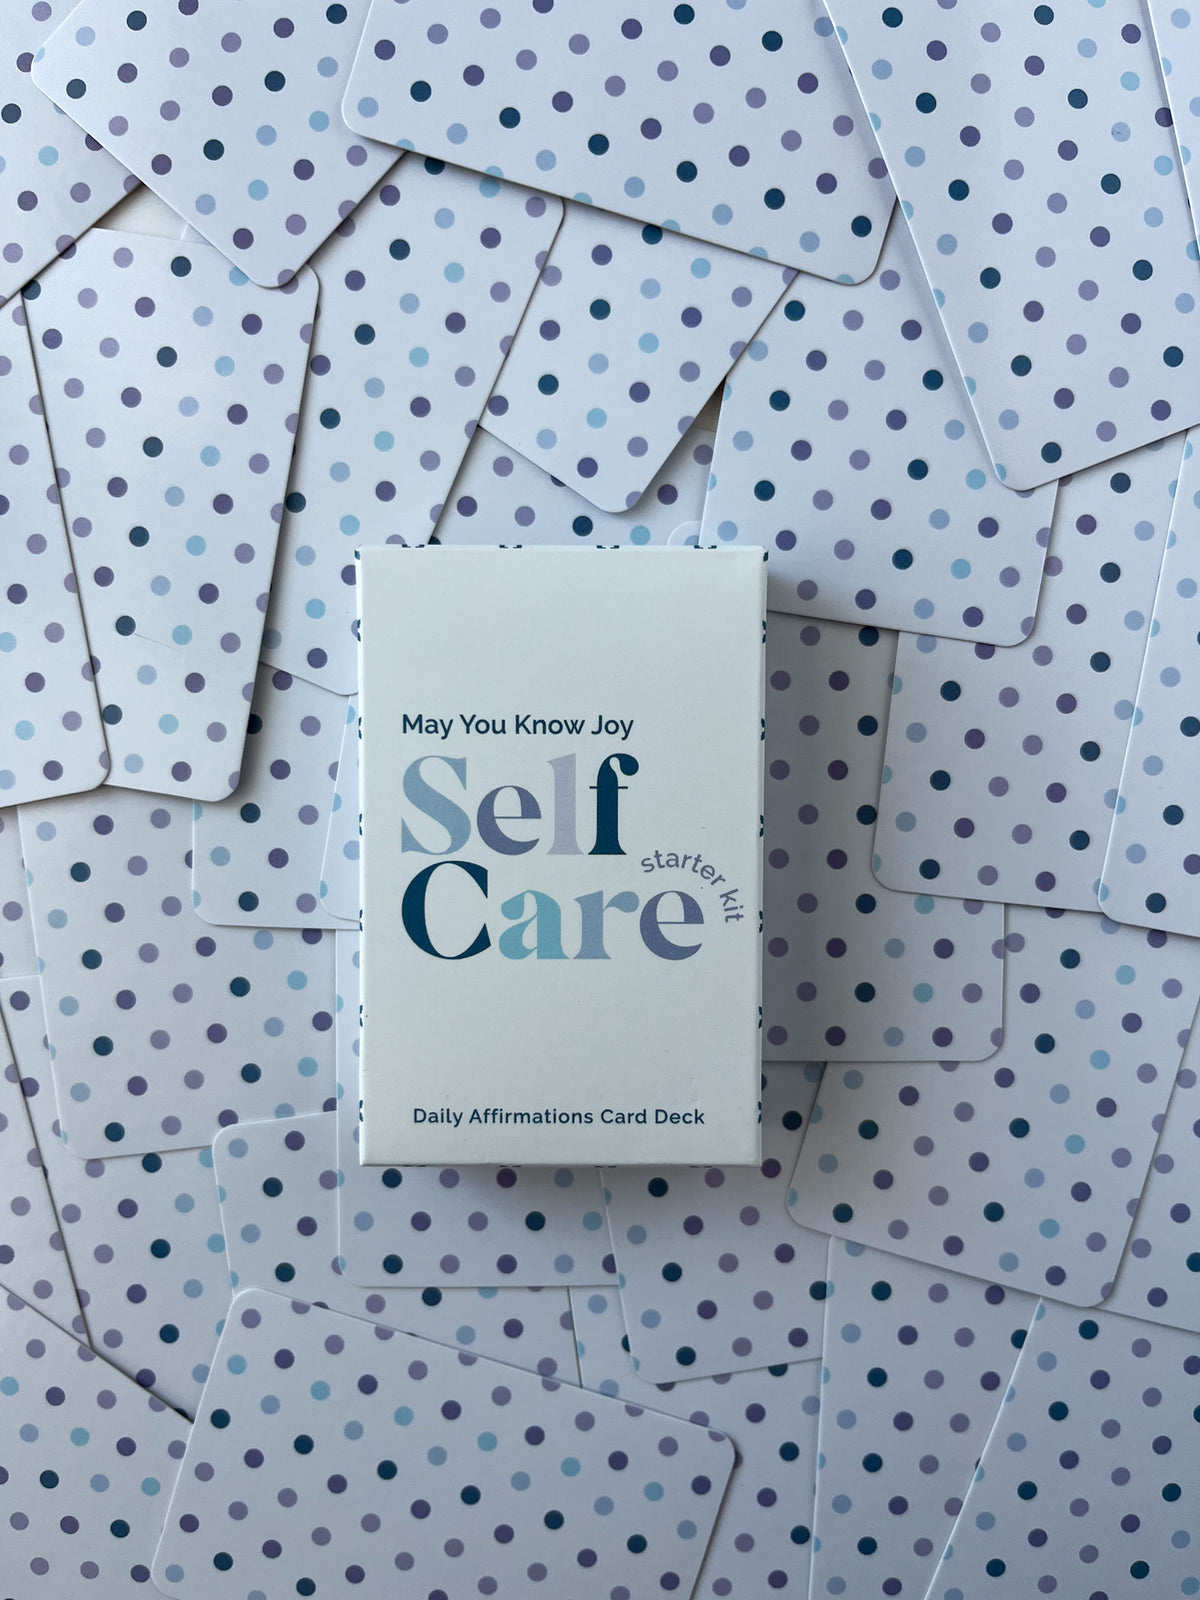 May You Know Joy Inc. - Self-Care Starter Kit - Ritual Gift Set - Not Every Libra